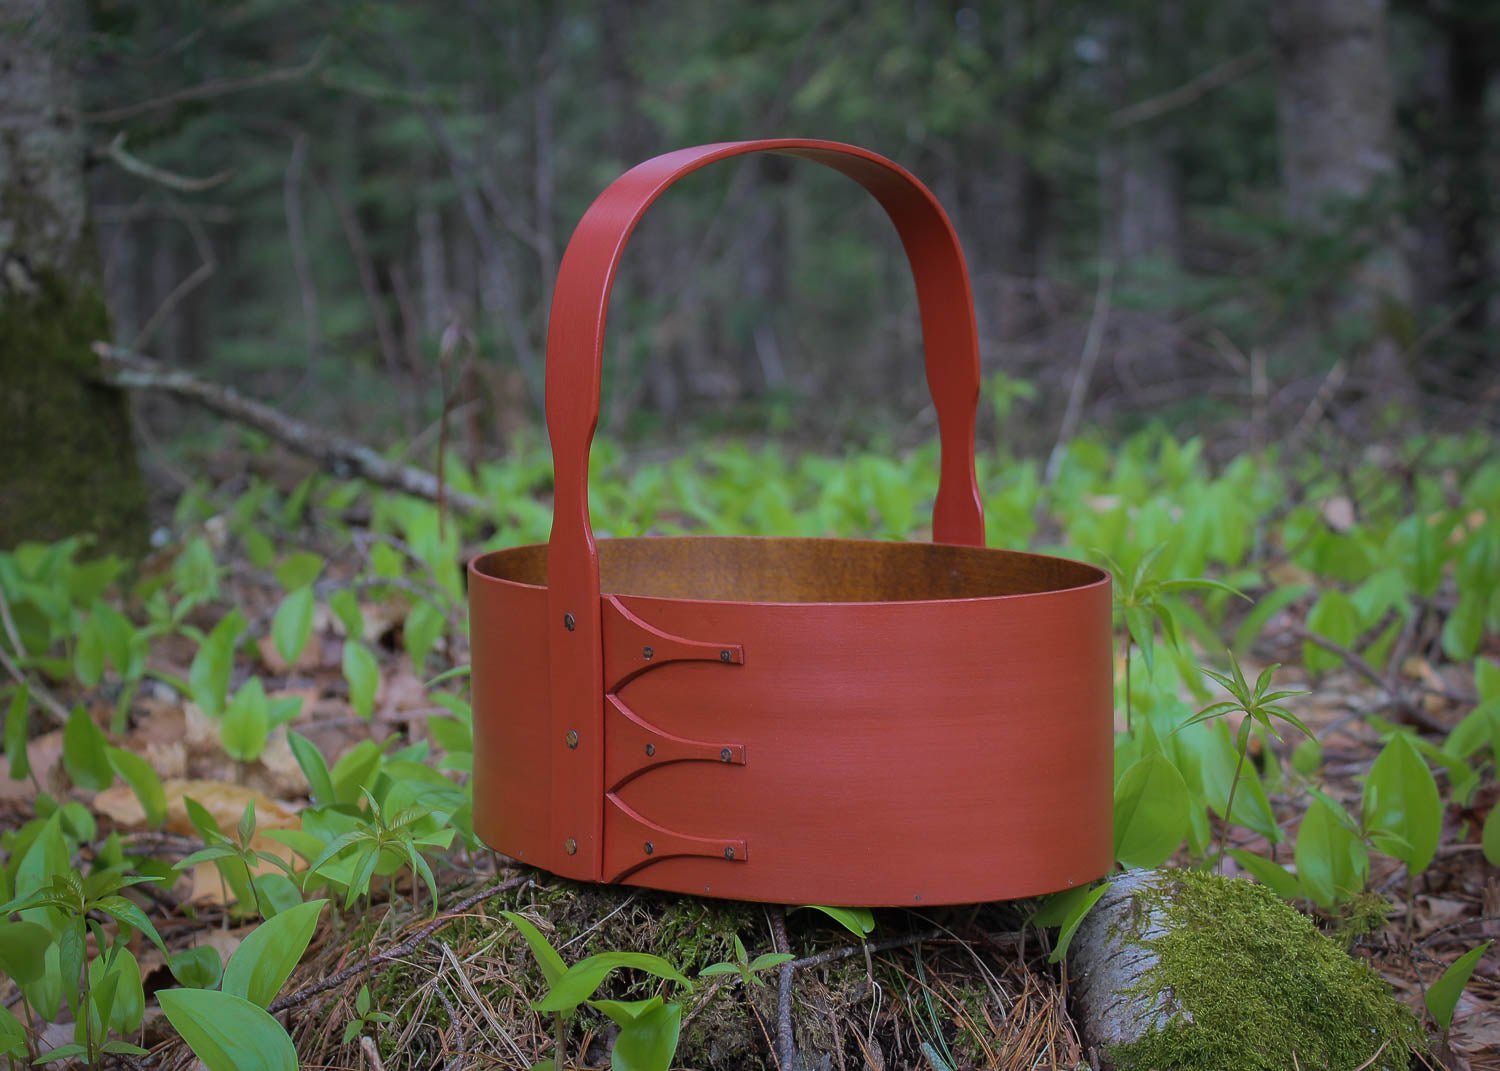 Shaker Carrier, Size #5, LeHays Shaker Boxes, Handcrafted in Maine, Red Milk Paint Finish, Outdoors